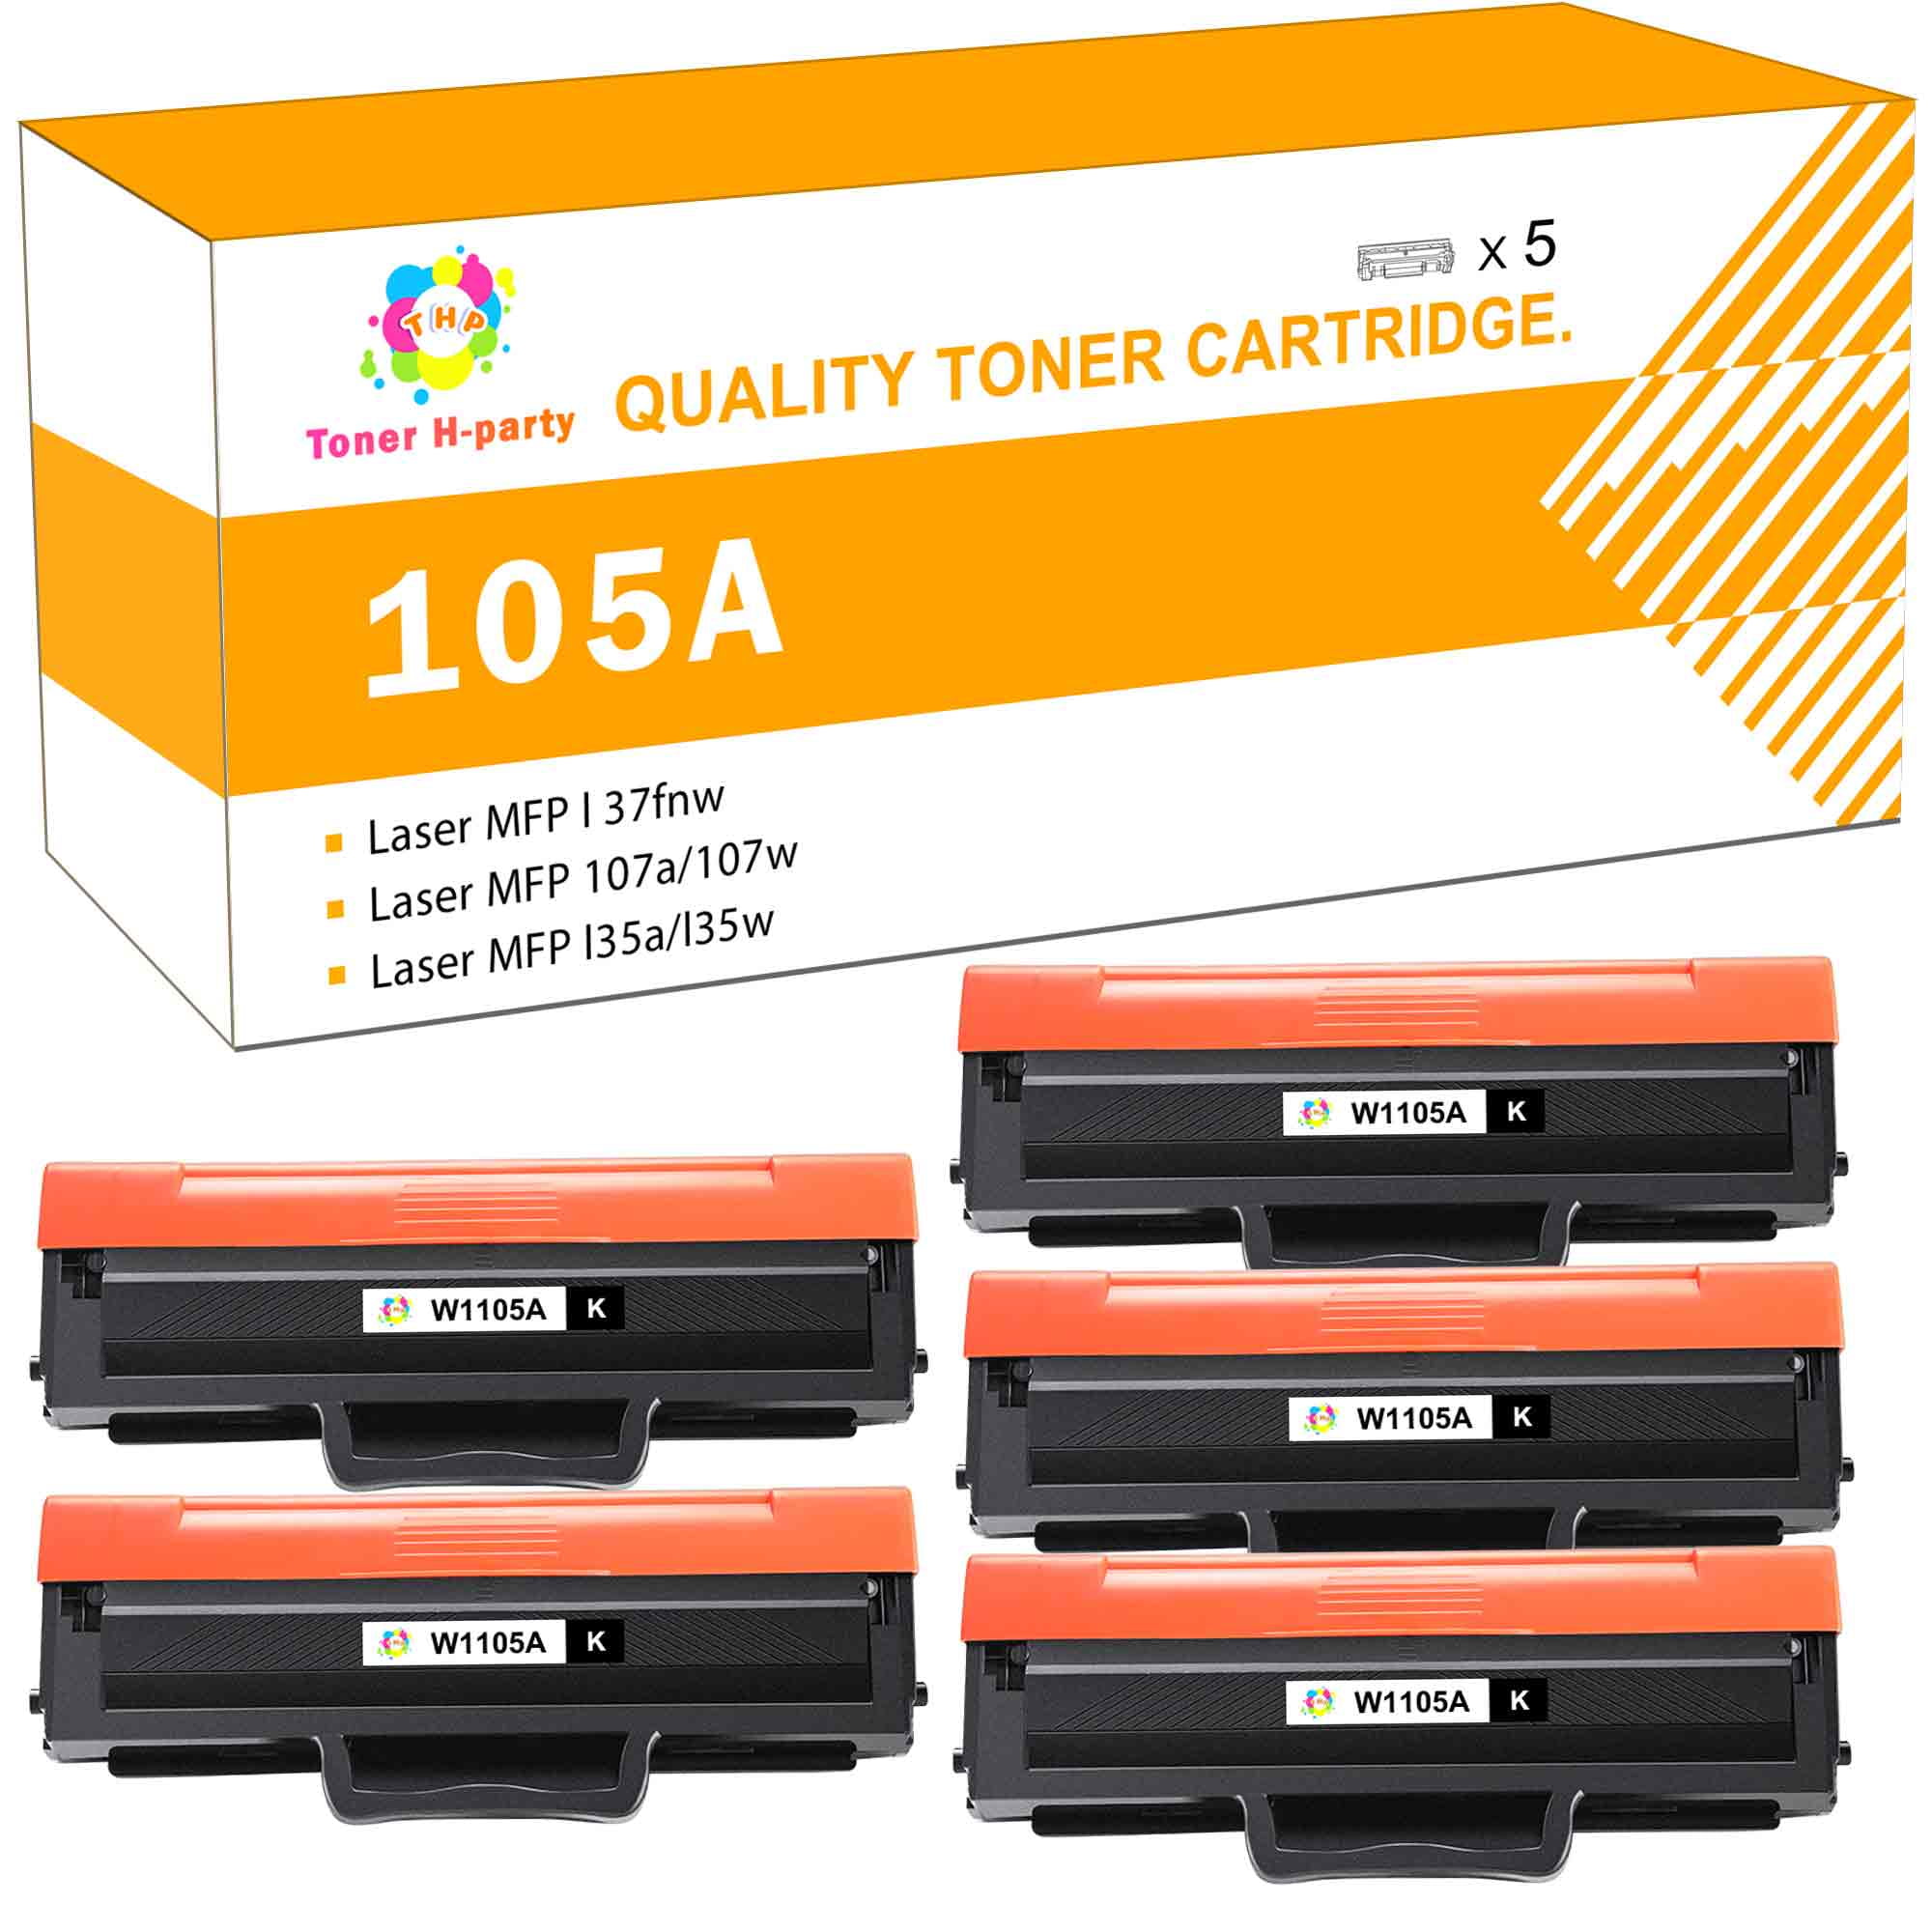 zoet Kan weerstaan Slager Toner H-Party 5-Pack Compatible Toner Cartridge Replacement for HP W1105A  for Use with Laser MFP 107a 107w, l35a l35w, 137fnw Laser Printer Ink Black  - Walmart.com